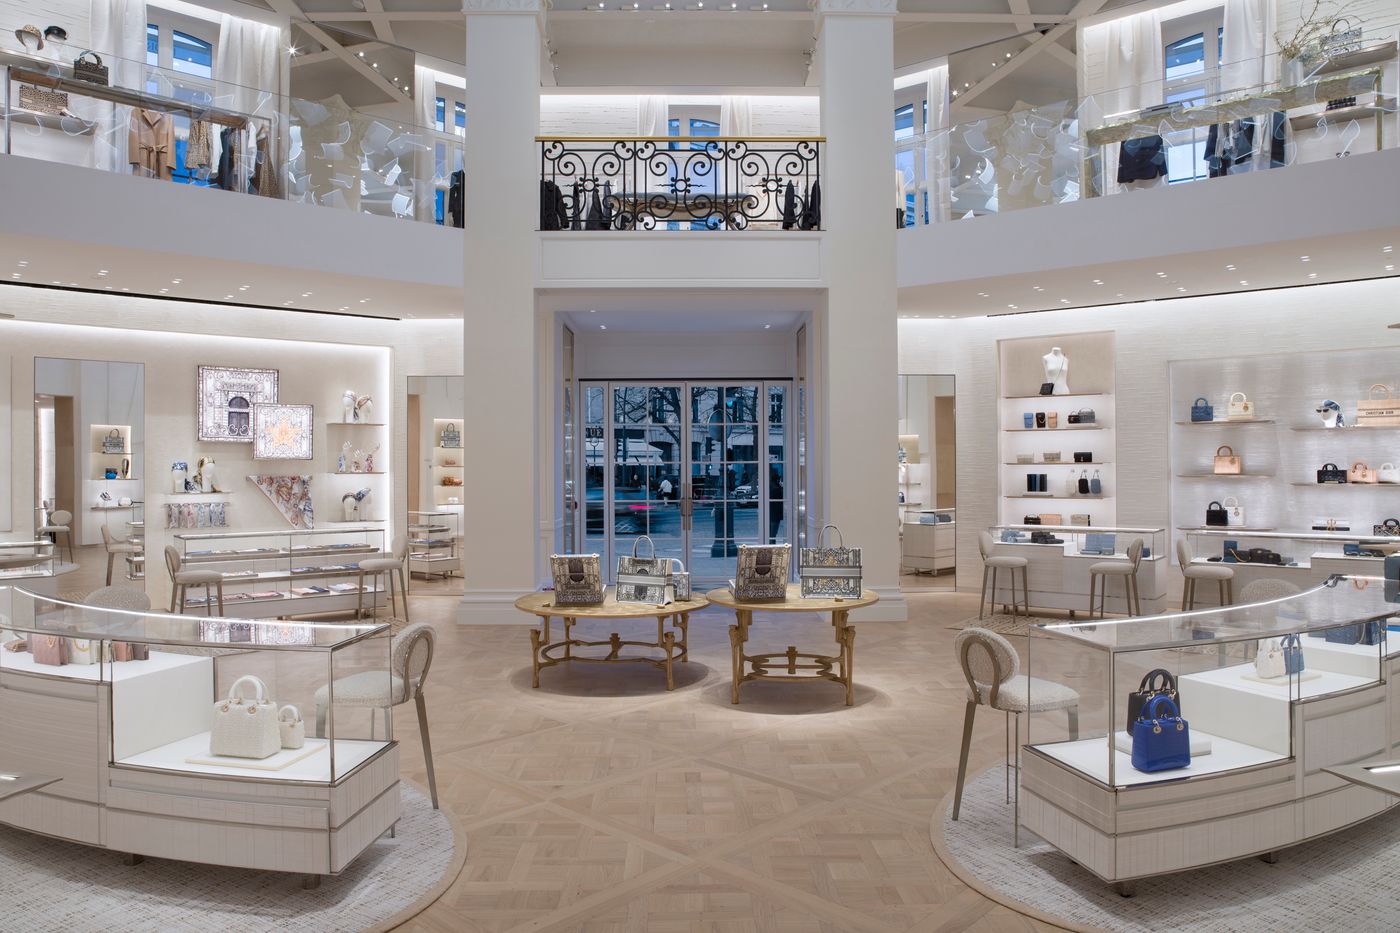 The Louis Vuitton, left, and Dior luxury clothing boutiques